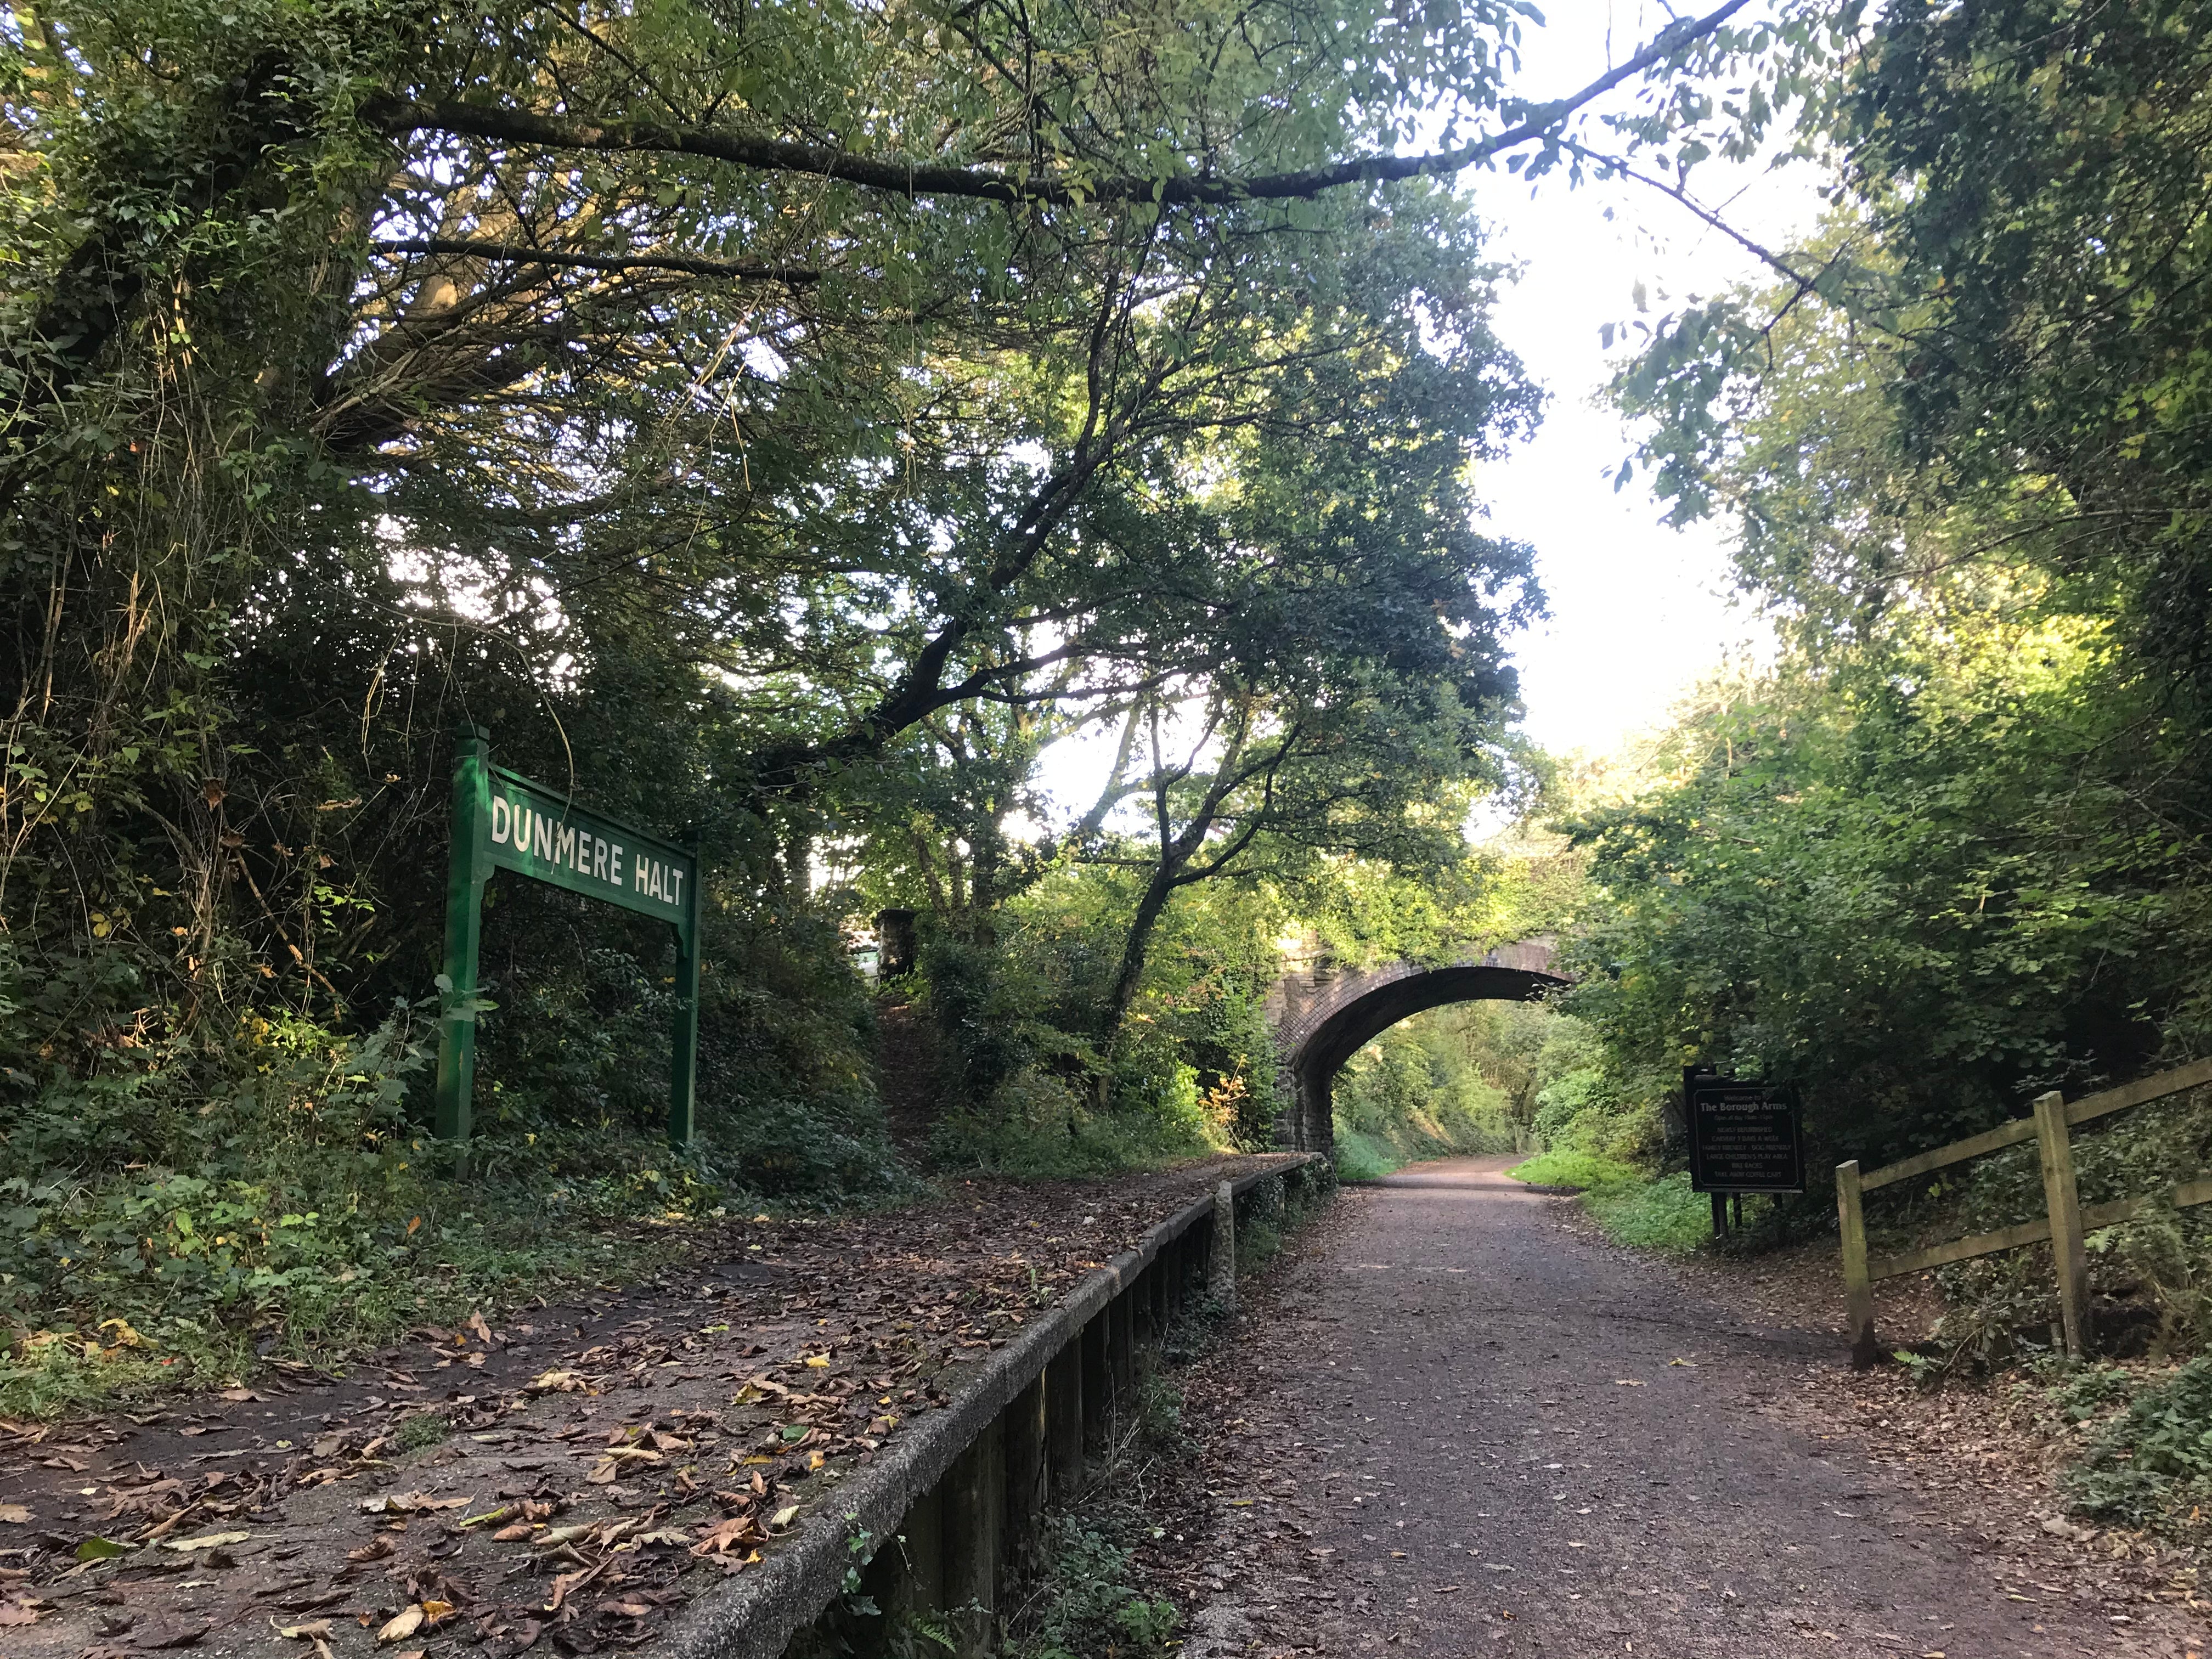 The Camel Trail, a former railway line